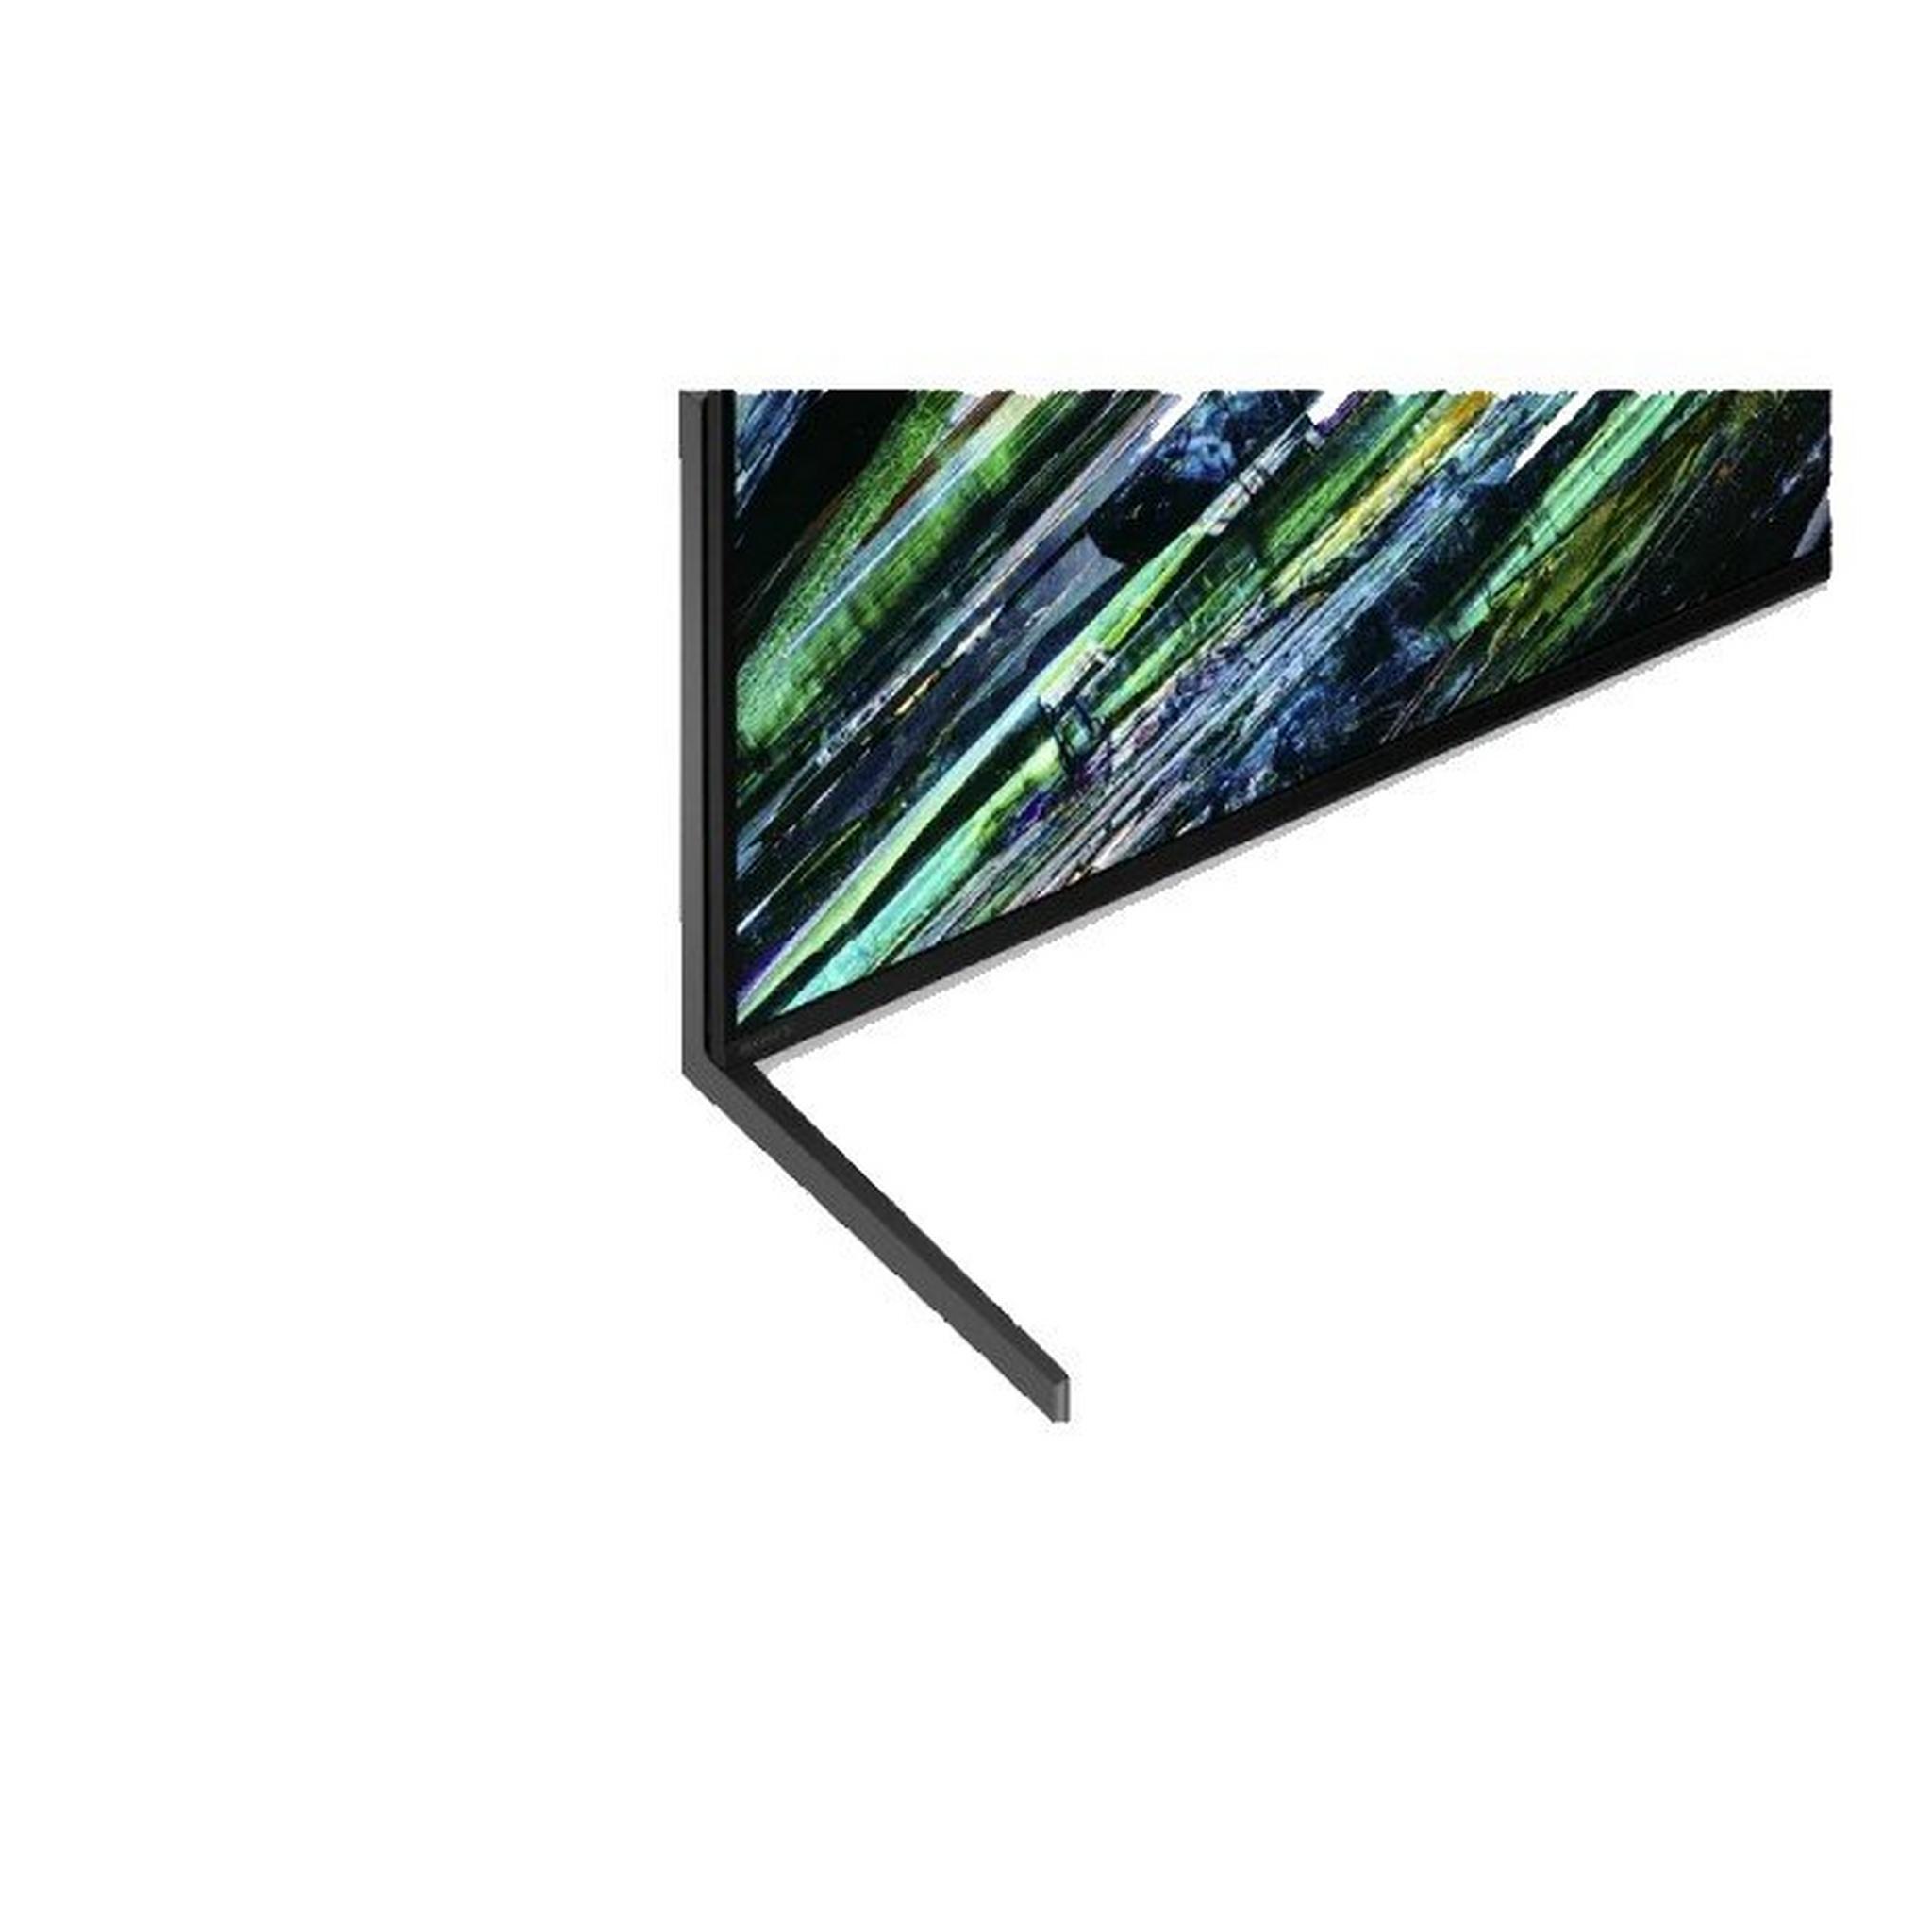 SONY 77-inch 4K UHD OLED Smart Android TV, XR-77A95L – Black